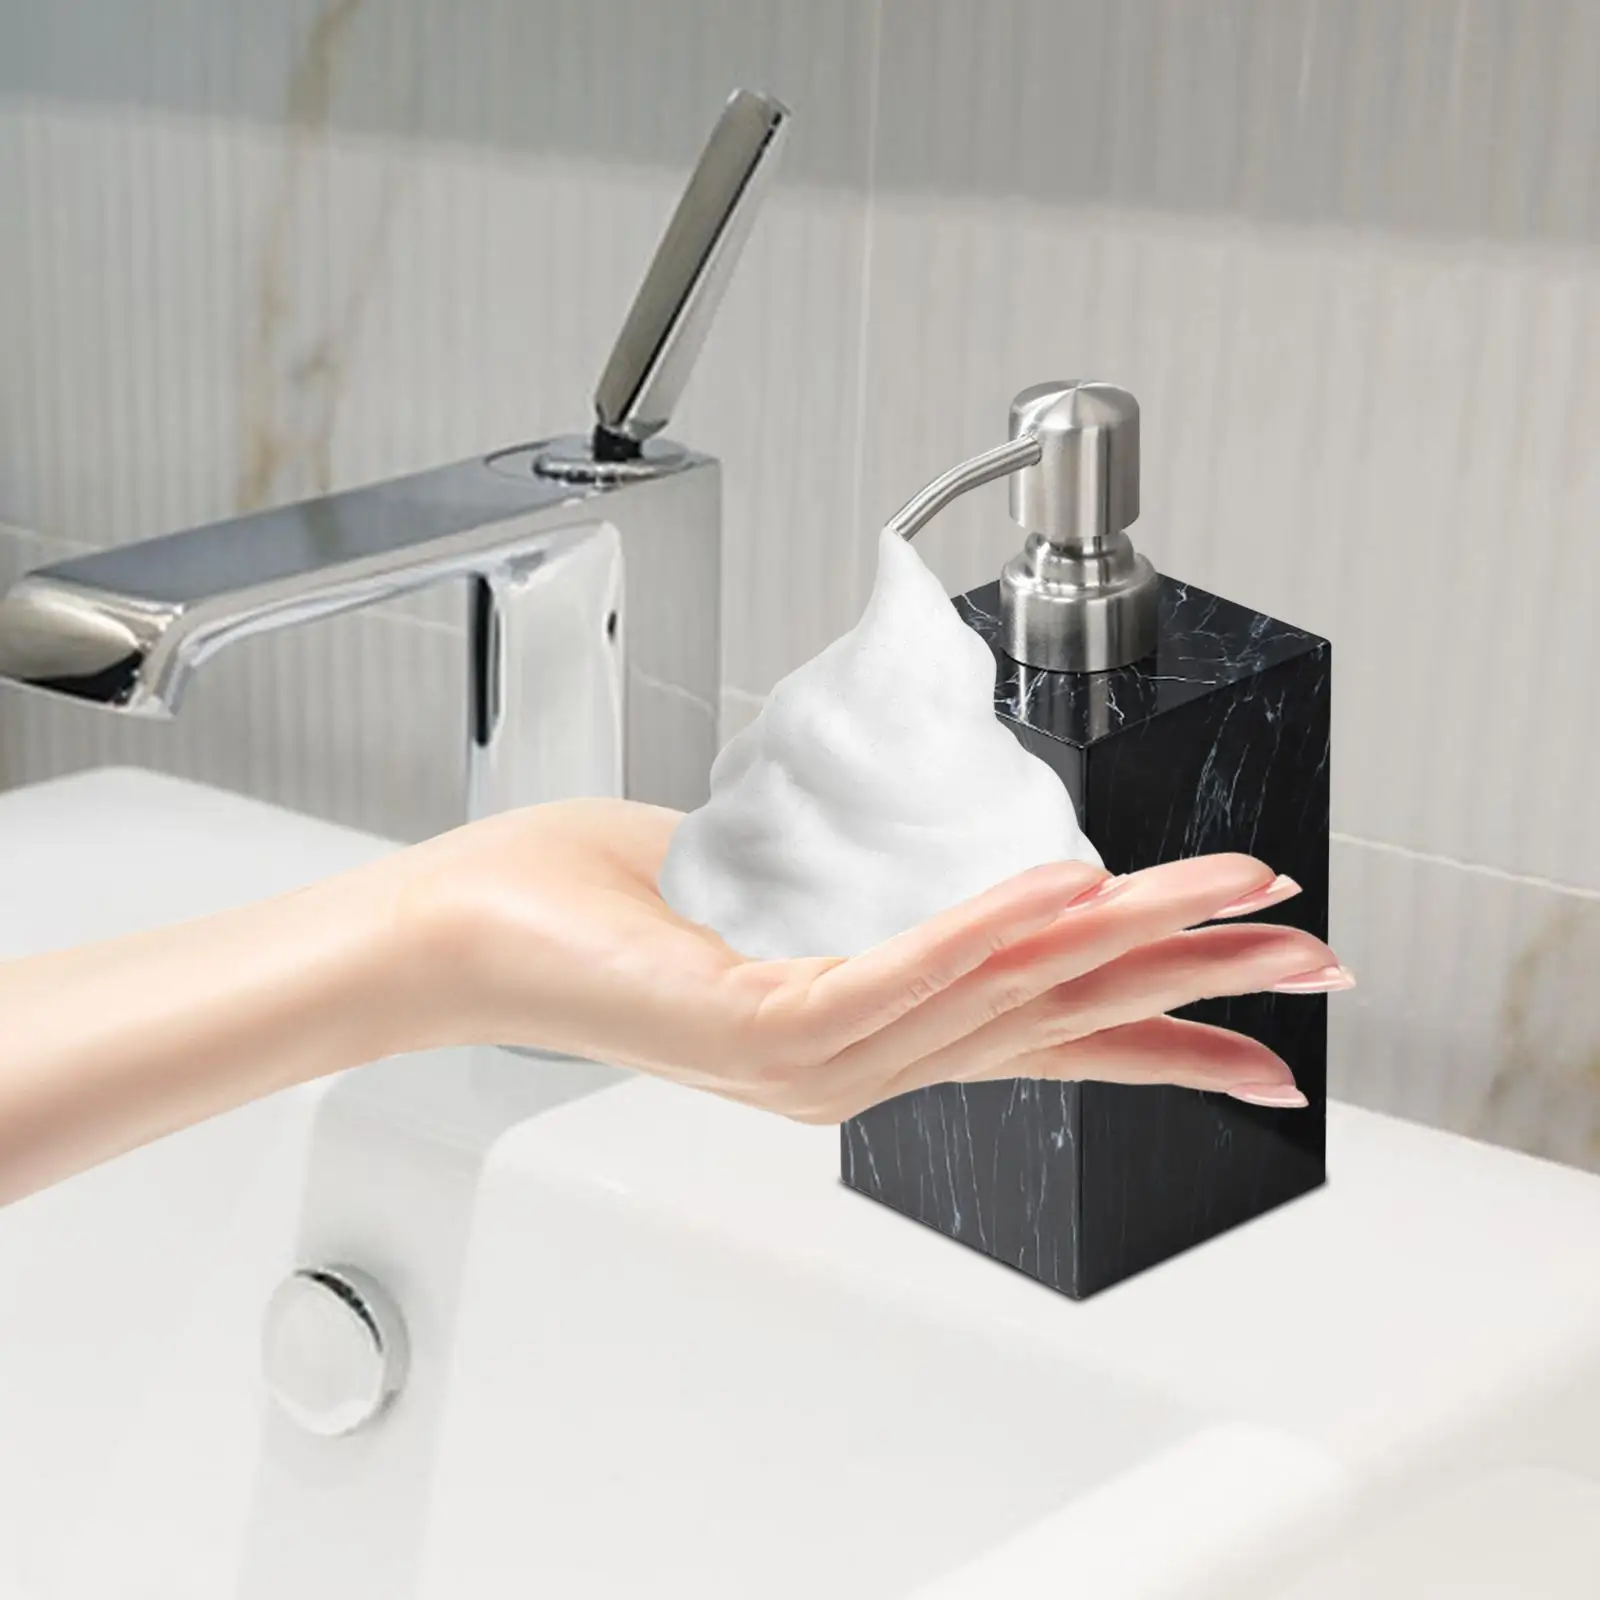 Pump Soap Container 500ml Durable Leakproof Salon Dispenser Resin Marble Texture Manual Soap Dispenser for Hotel Countertop Home